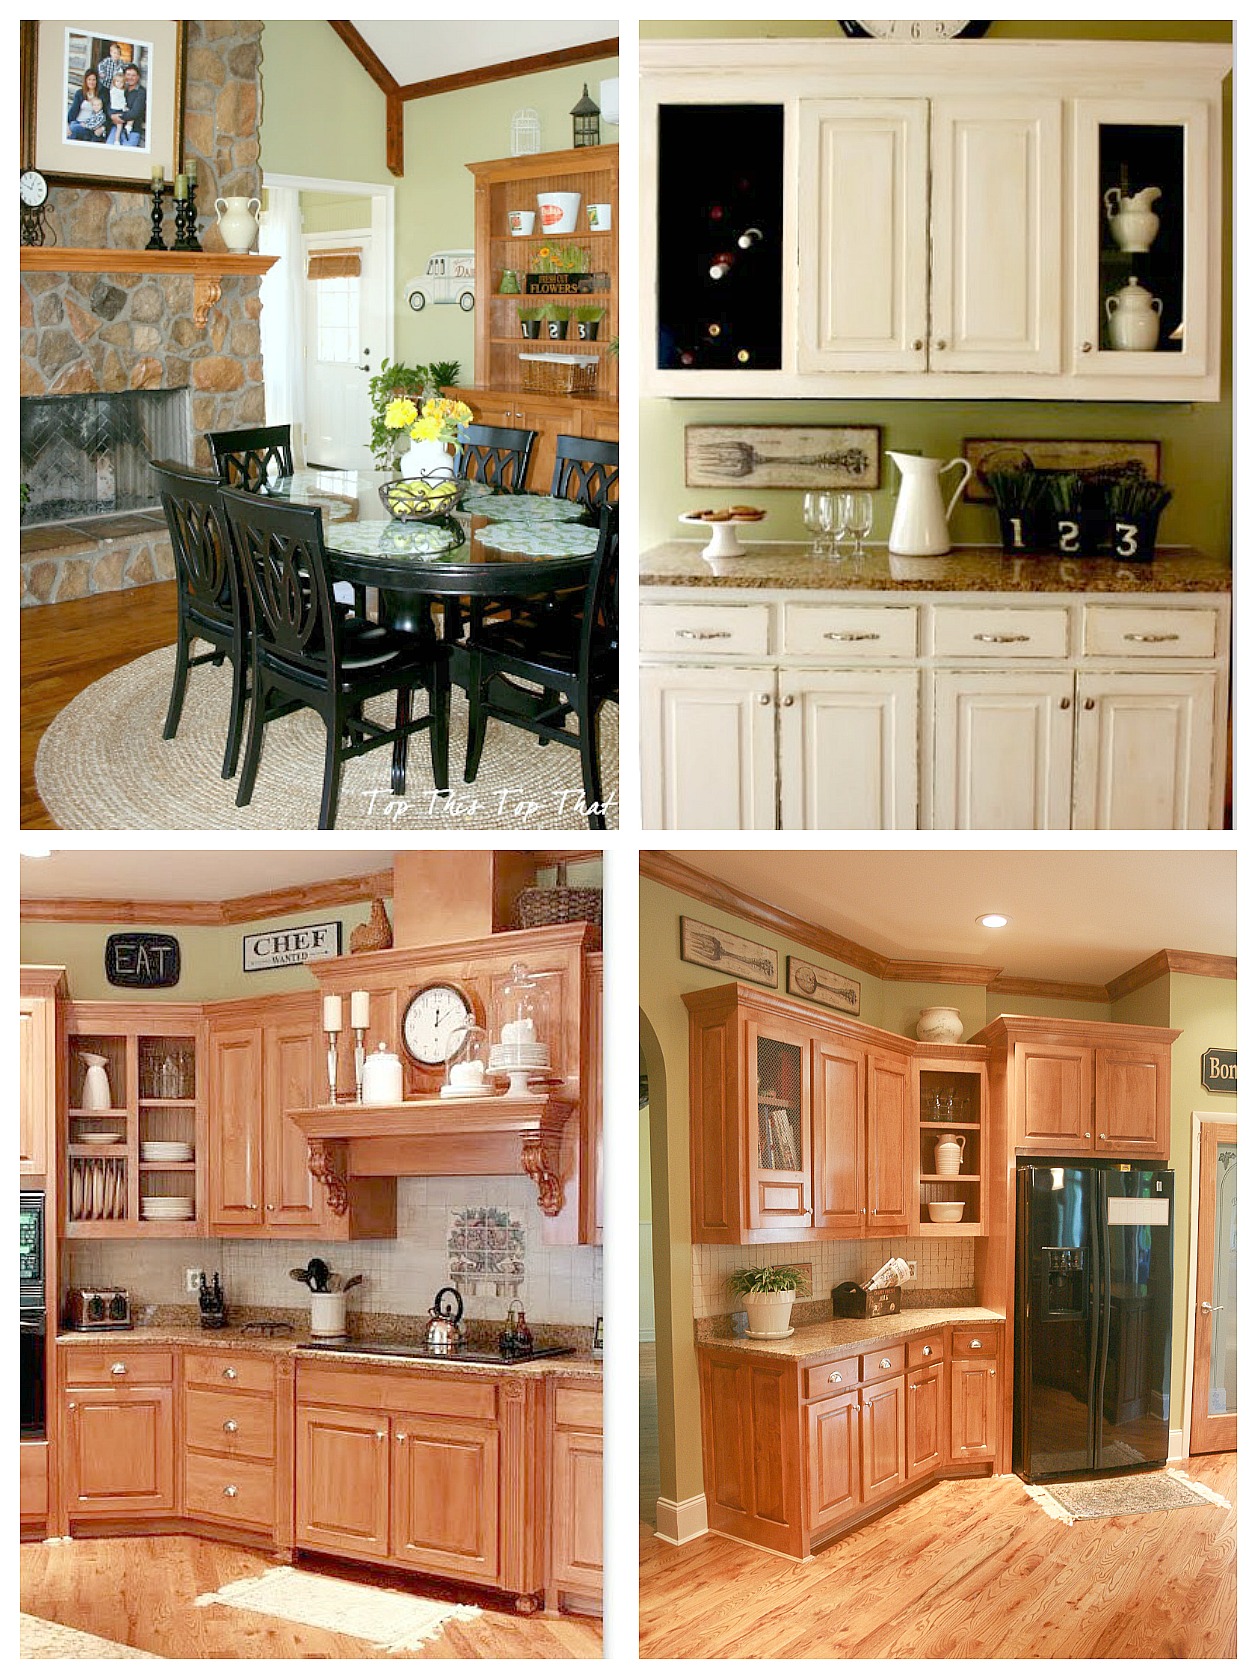 kitchen with cherry colored cabinets